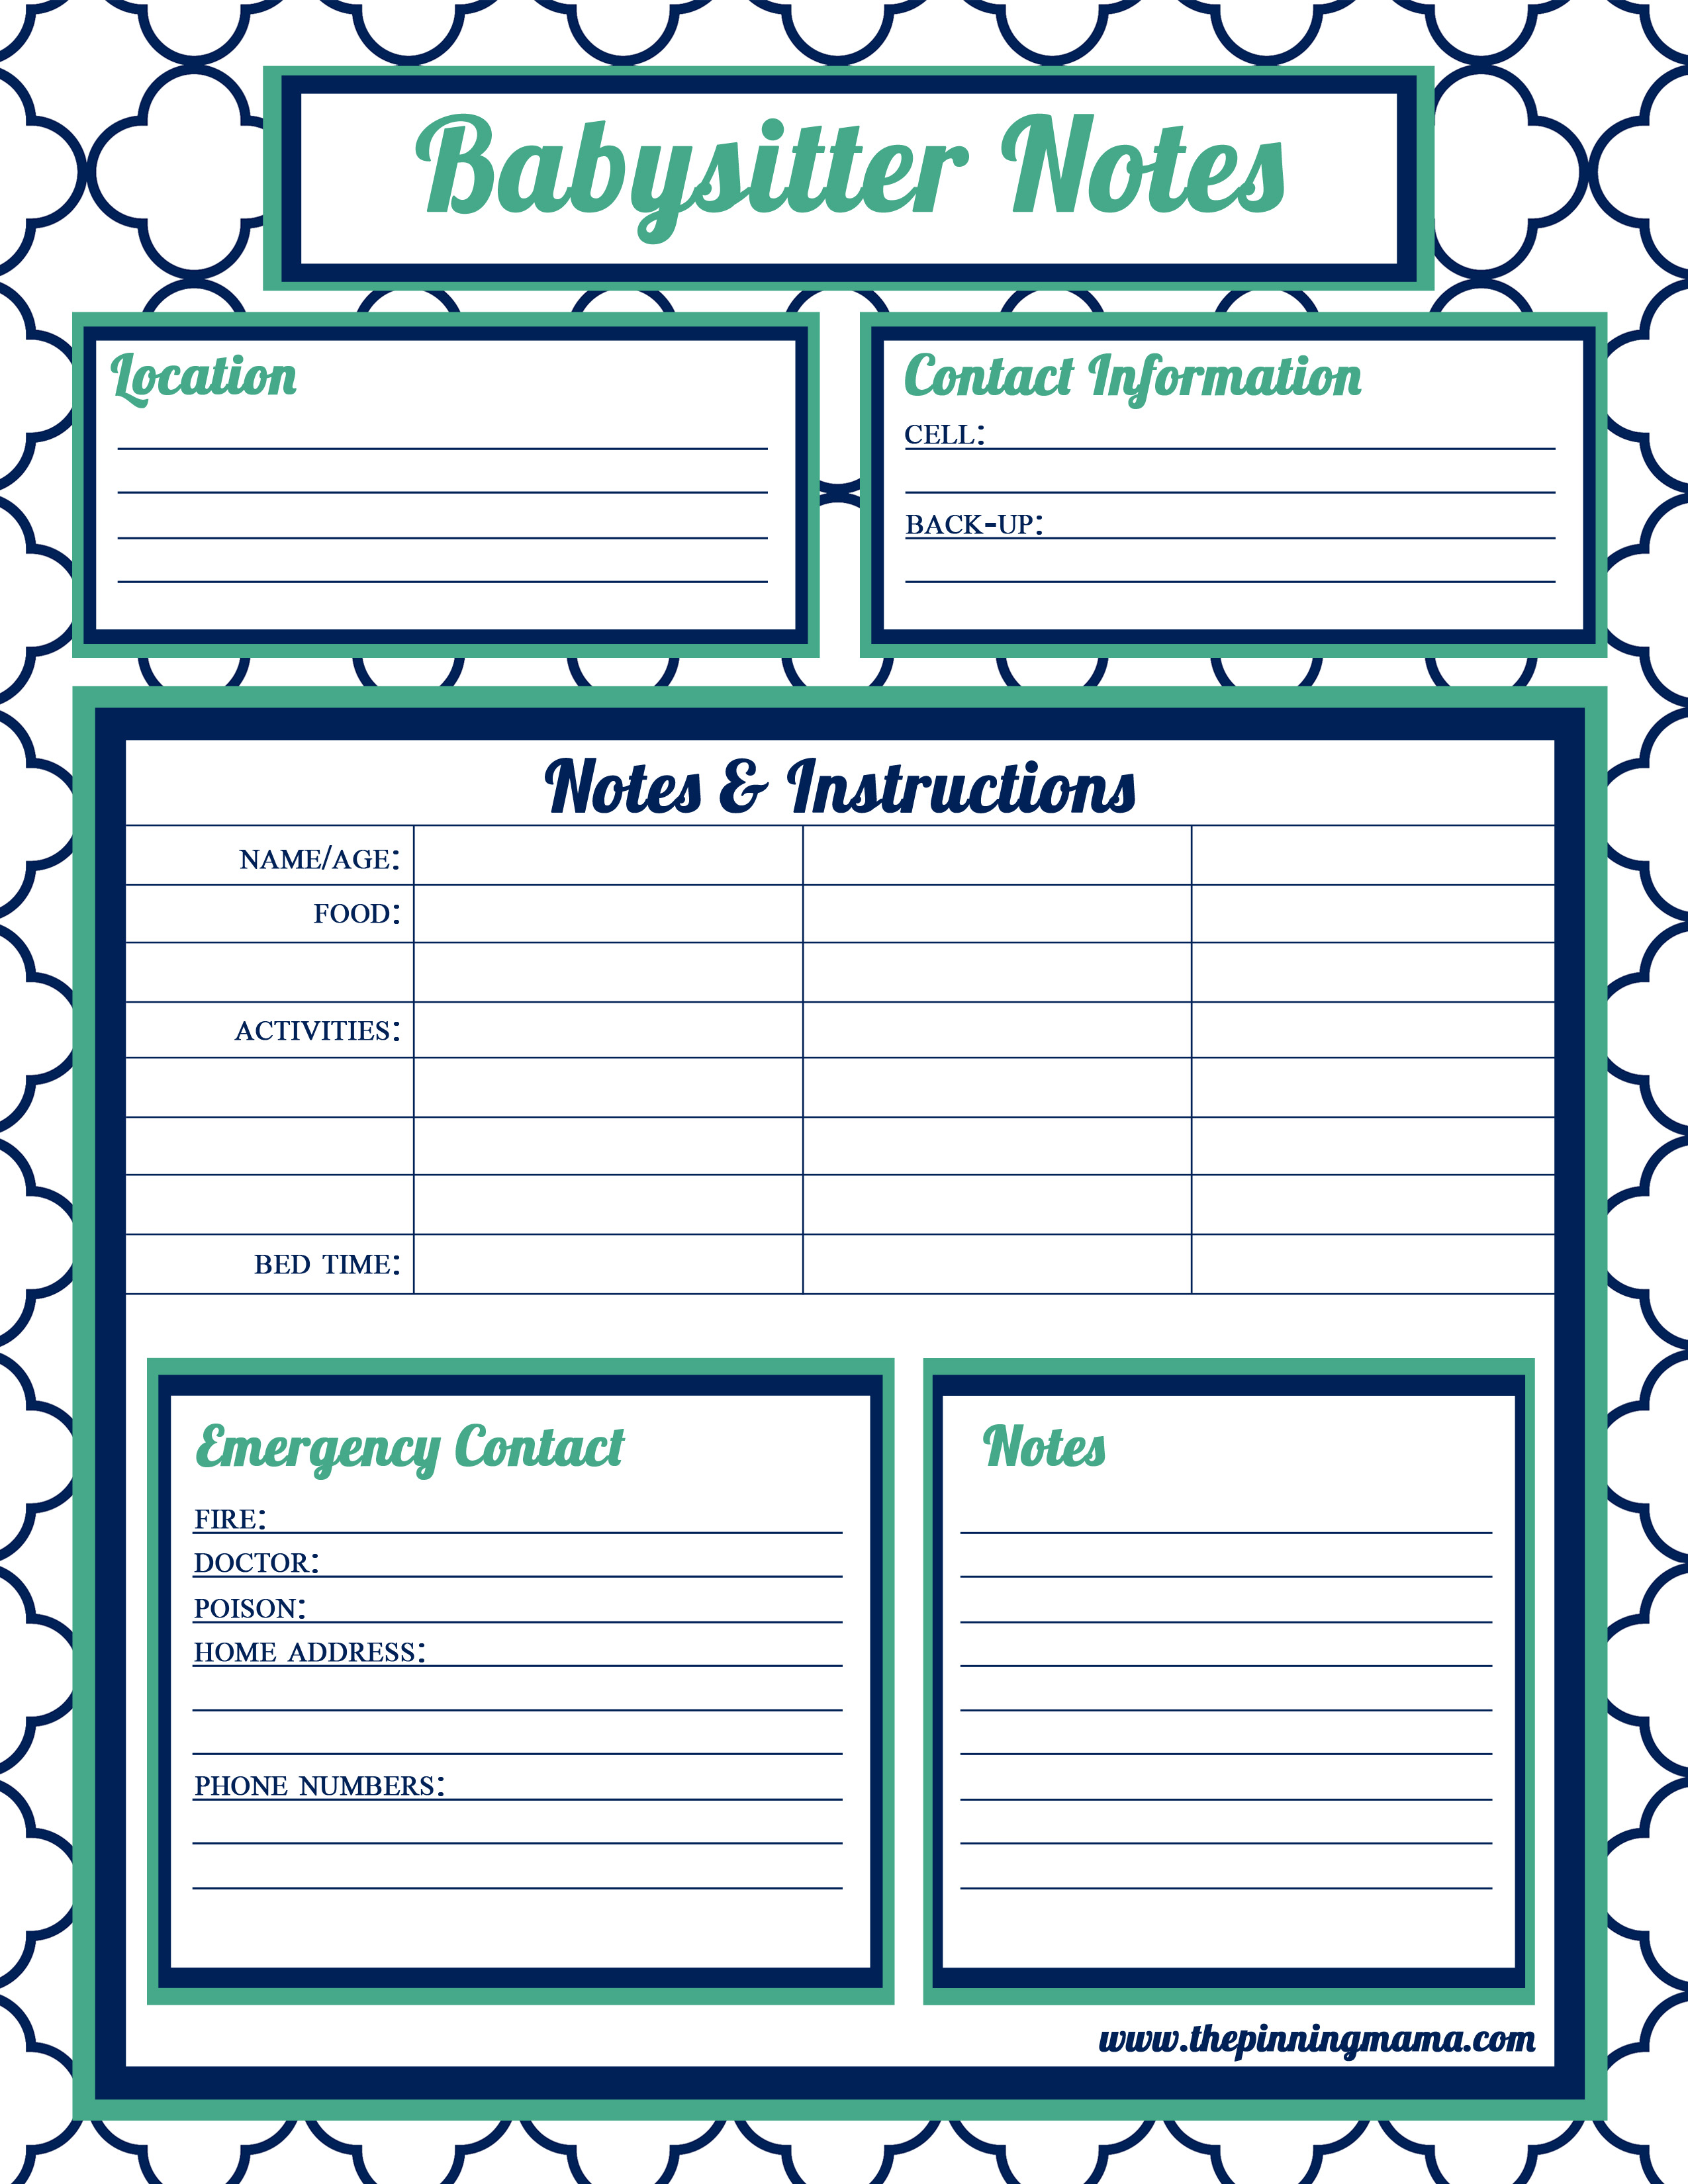 Babysitter Notes Template